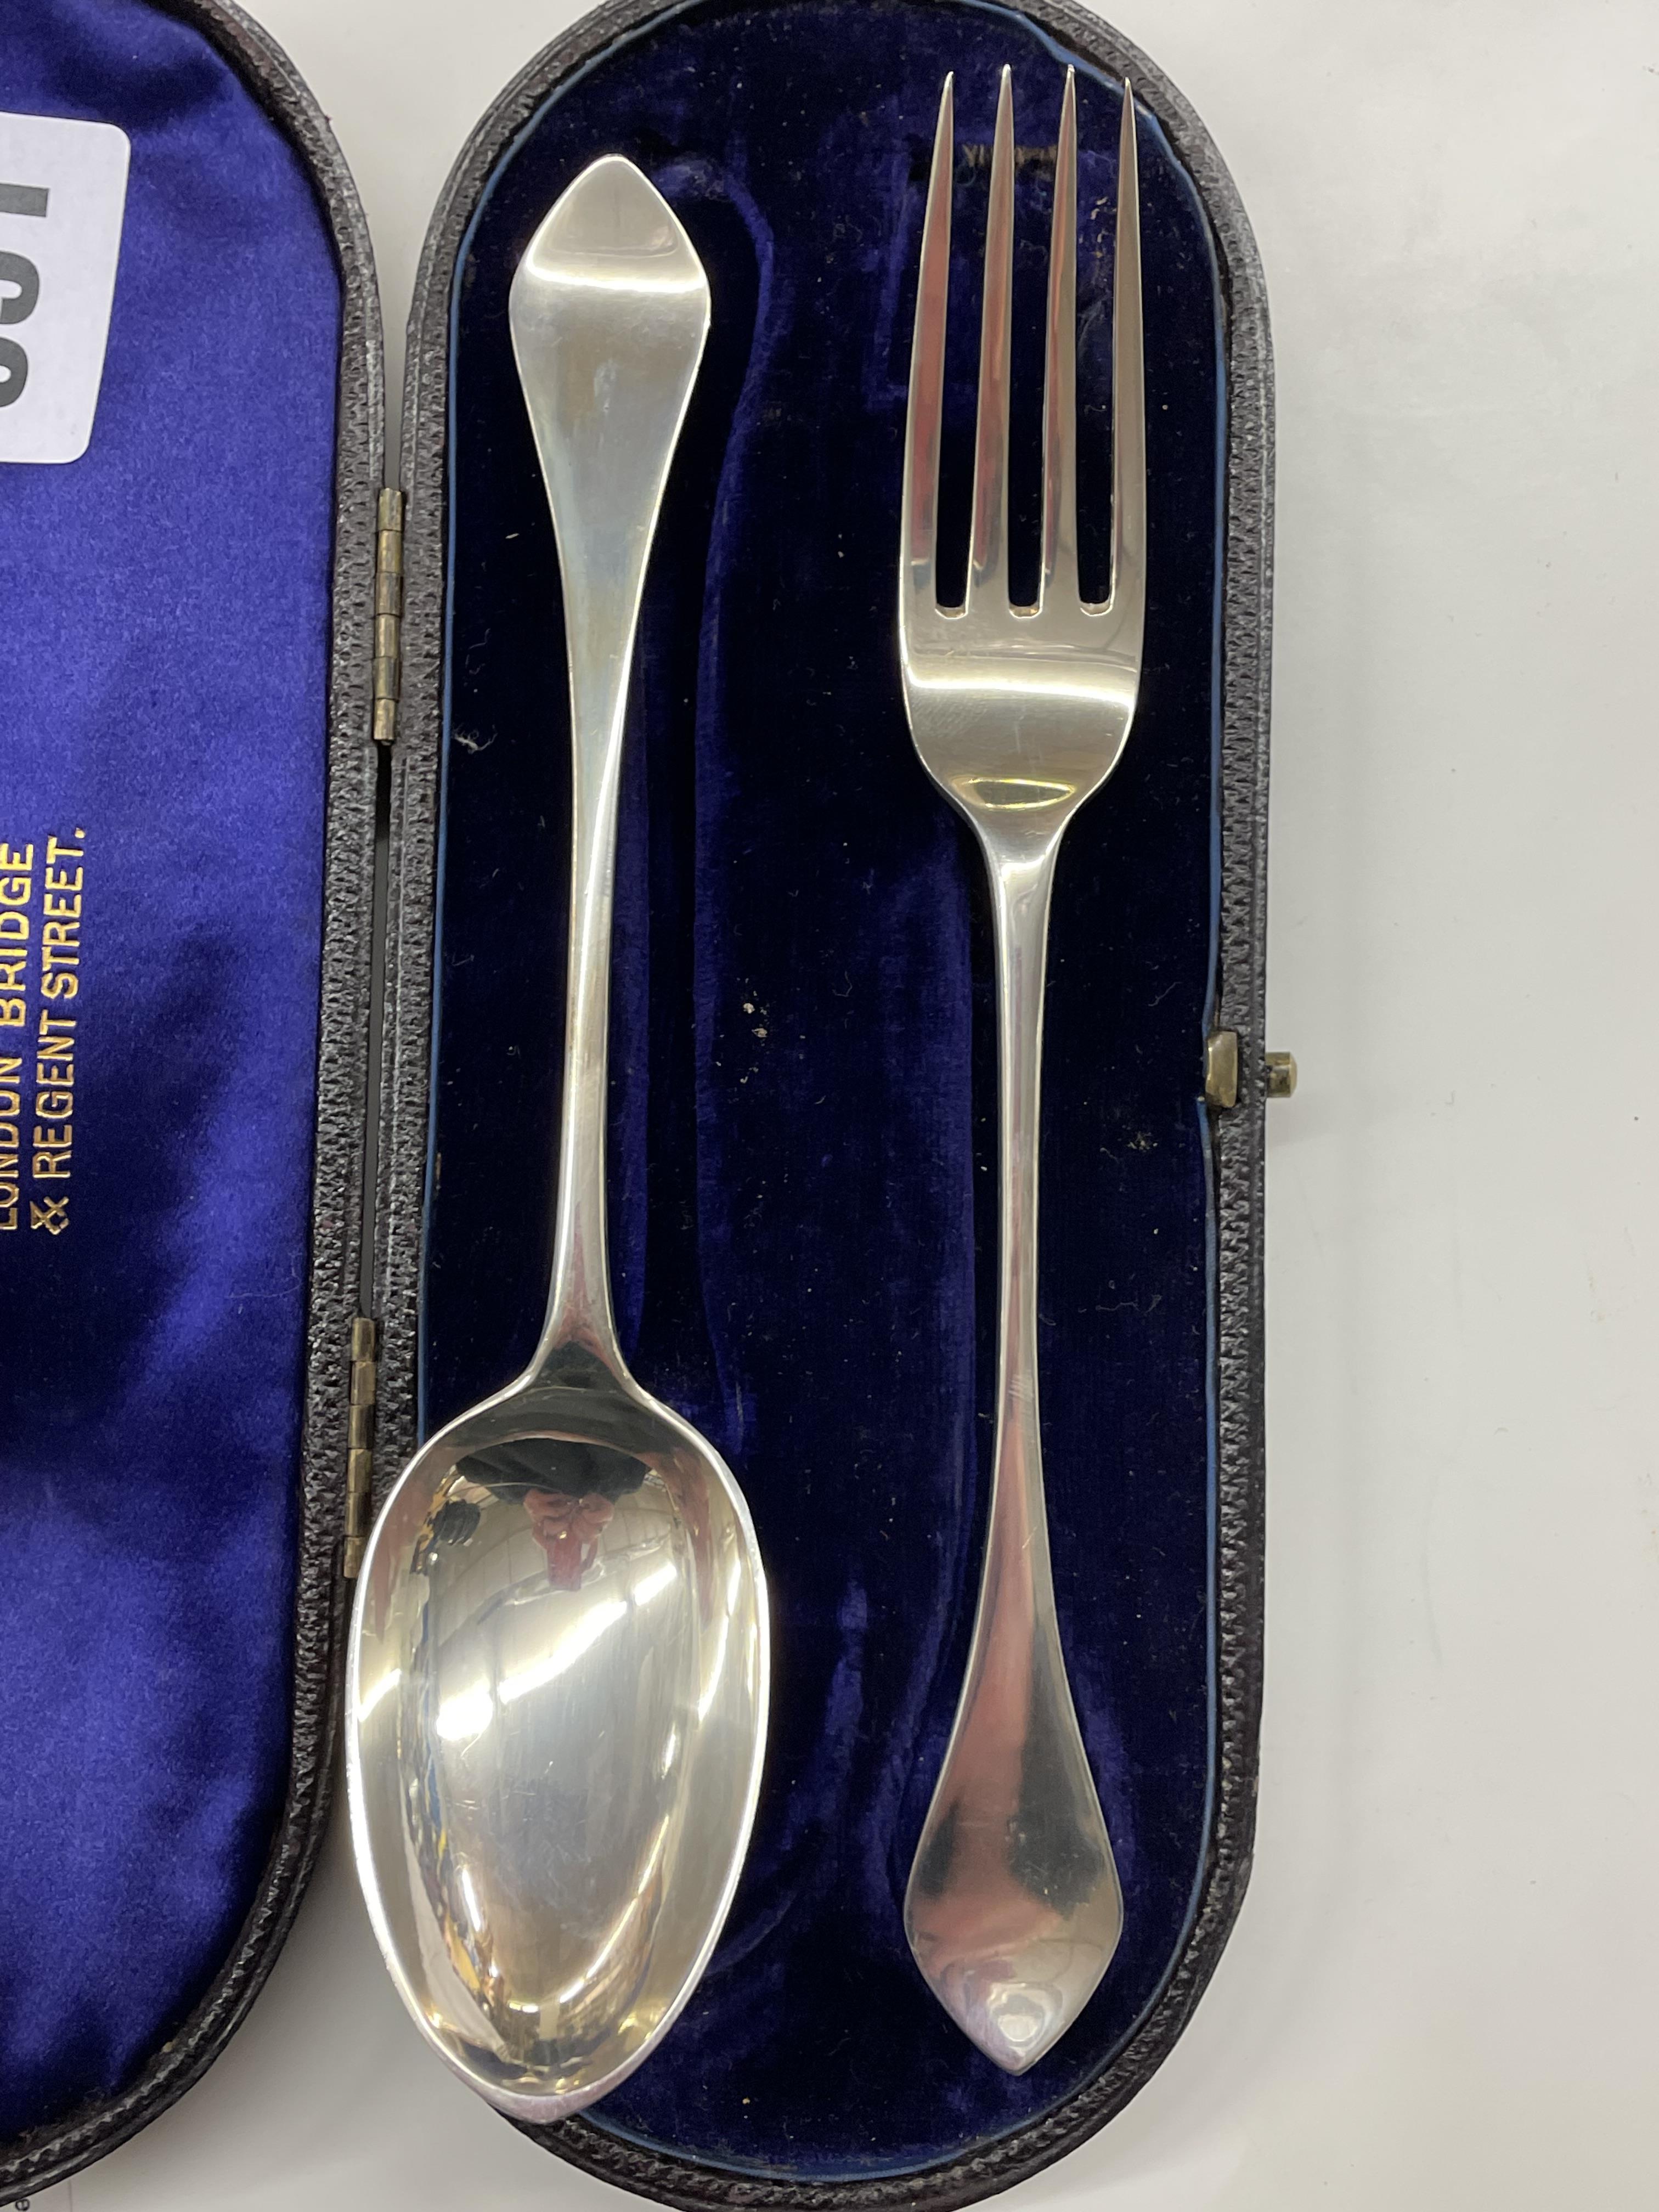 CASED MAPPIN BROTHERS LONDON SILVER SPOON AND FORK BY GEORGE ANGEL - Image 4 of 4